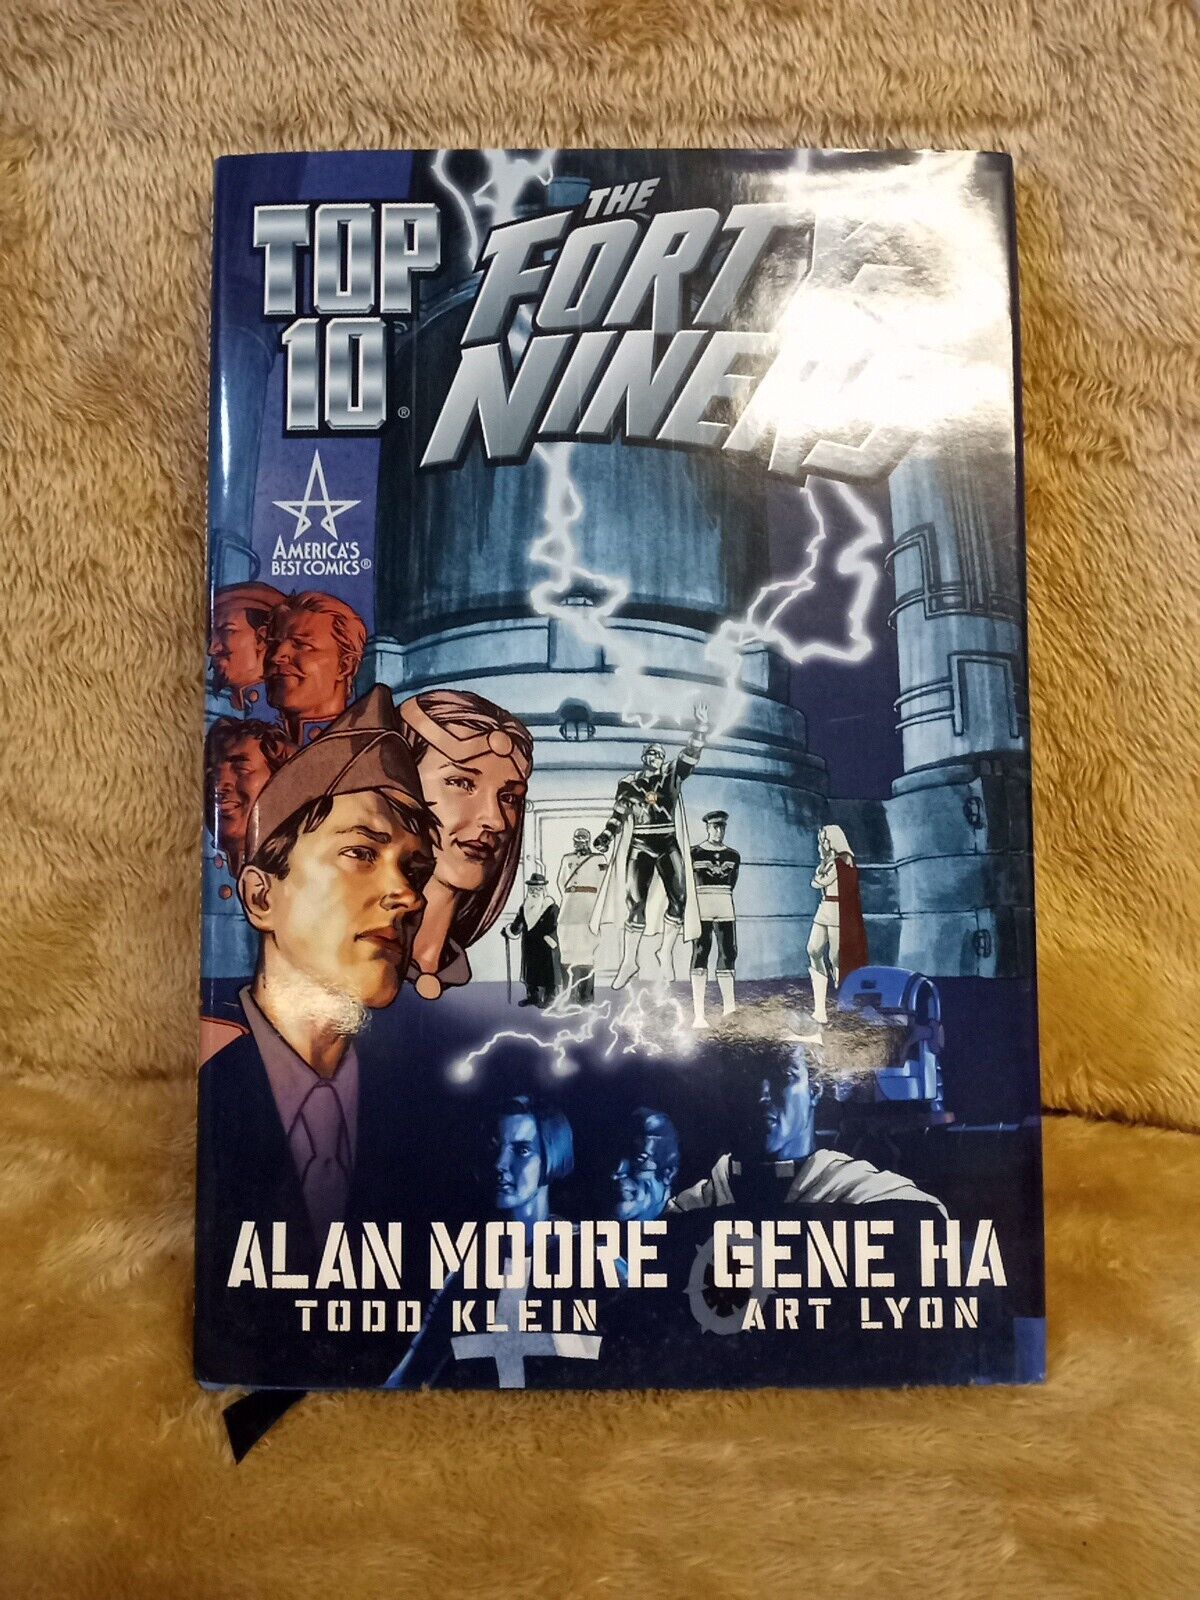  TOP 10: THE FORTY-NINERS HARDCOVER by ALAN MOORE - AMERICA'S BEST COMICS/2005